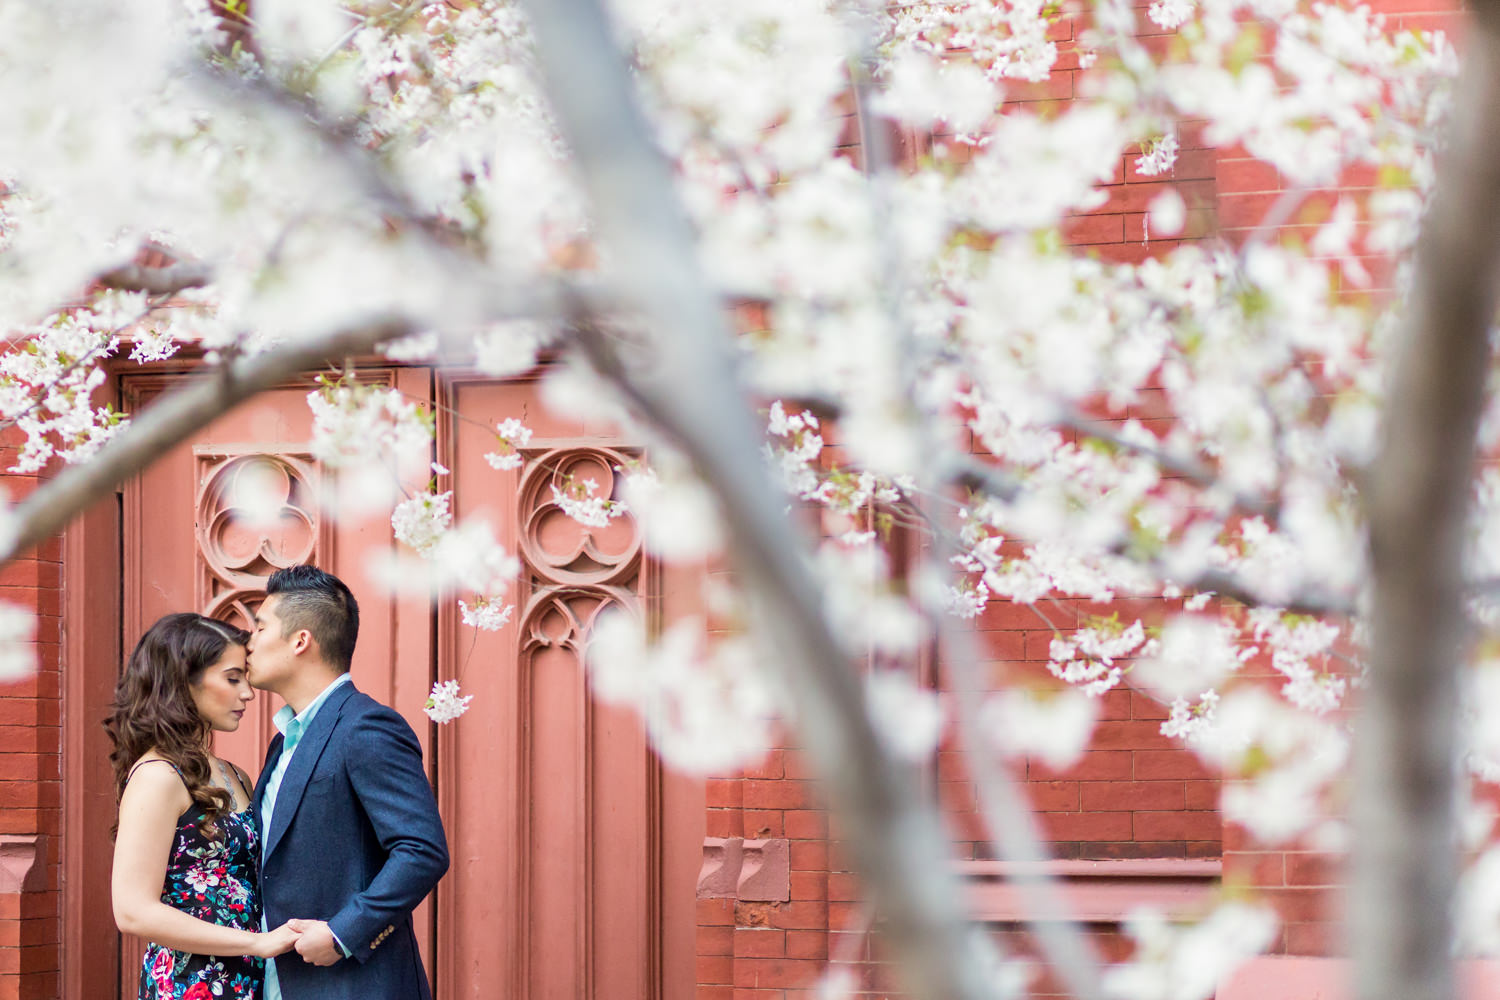 This was taken in Chinatown, Washington DC, they are standing in front of pink mauve church doors and kissing, They are framed by beautiful white cherry blossom trees, The groom is Asian, Procopio Photography, best top Washington DC photographer, best top Maryland photographer, best top Virginia photographer, best top DMV photographer, best top wedding photographer, best top commercial photographer, best top portrait photographer, best top boudoir photographer, modern fine art portraits, dramatic, unique, different, bold, editorial, photojournalism, award winning photographer, published photographer, memorable images, be different, stand out, engagement photography